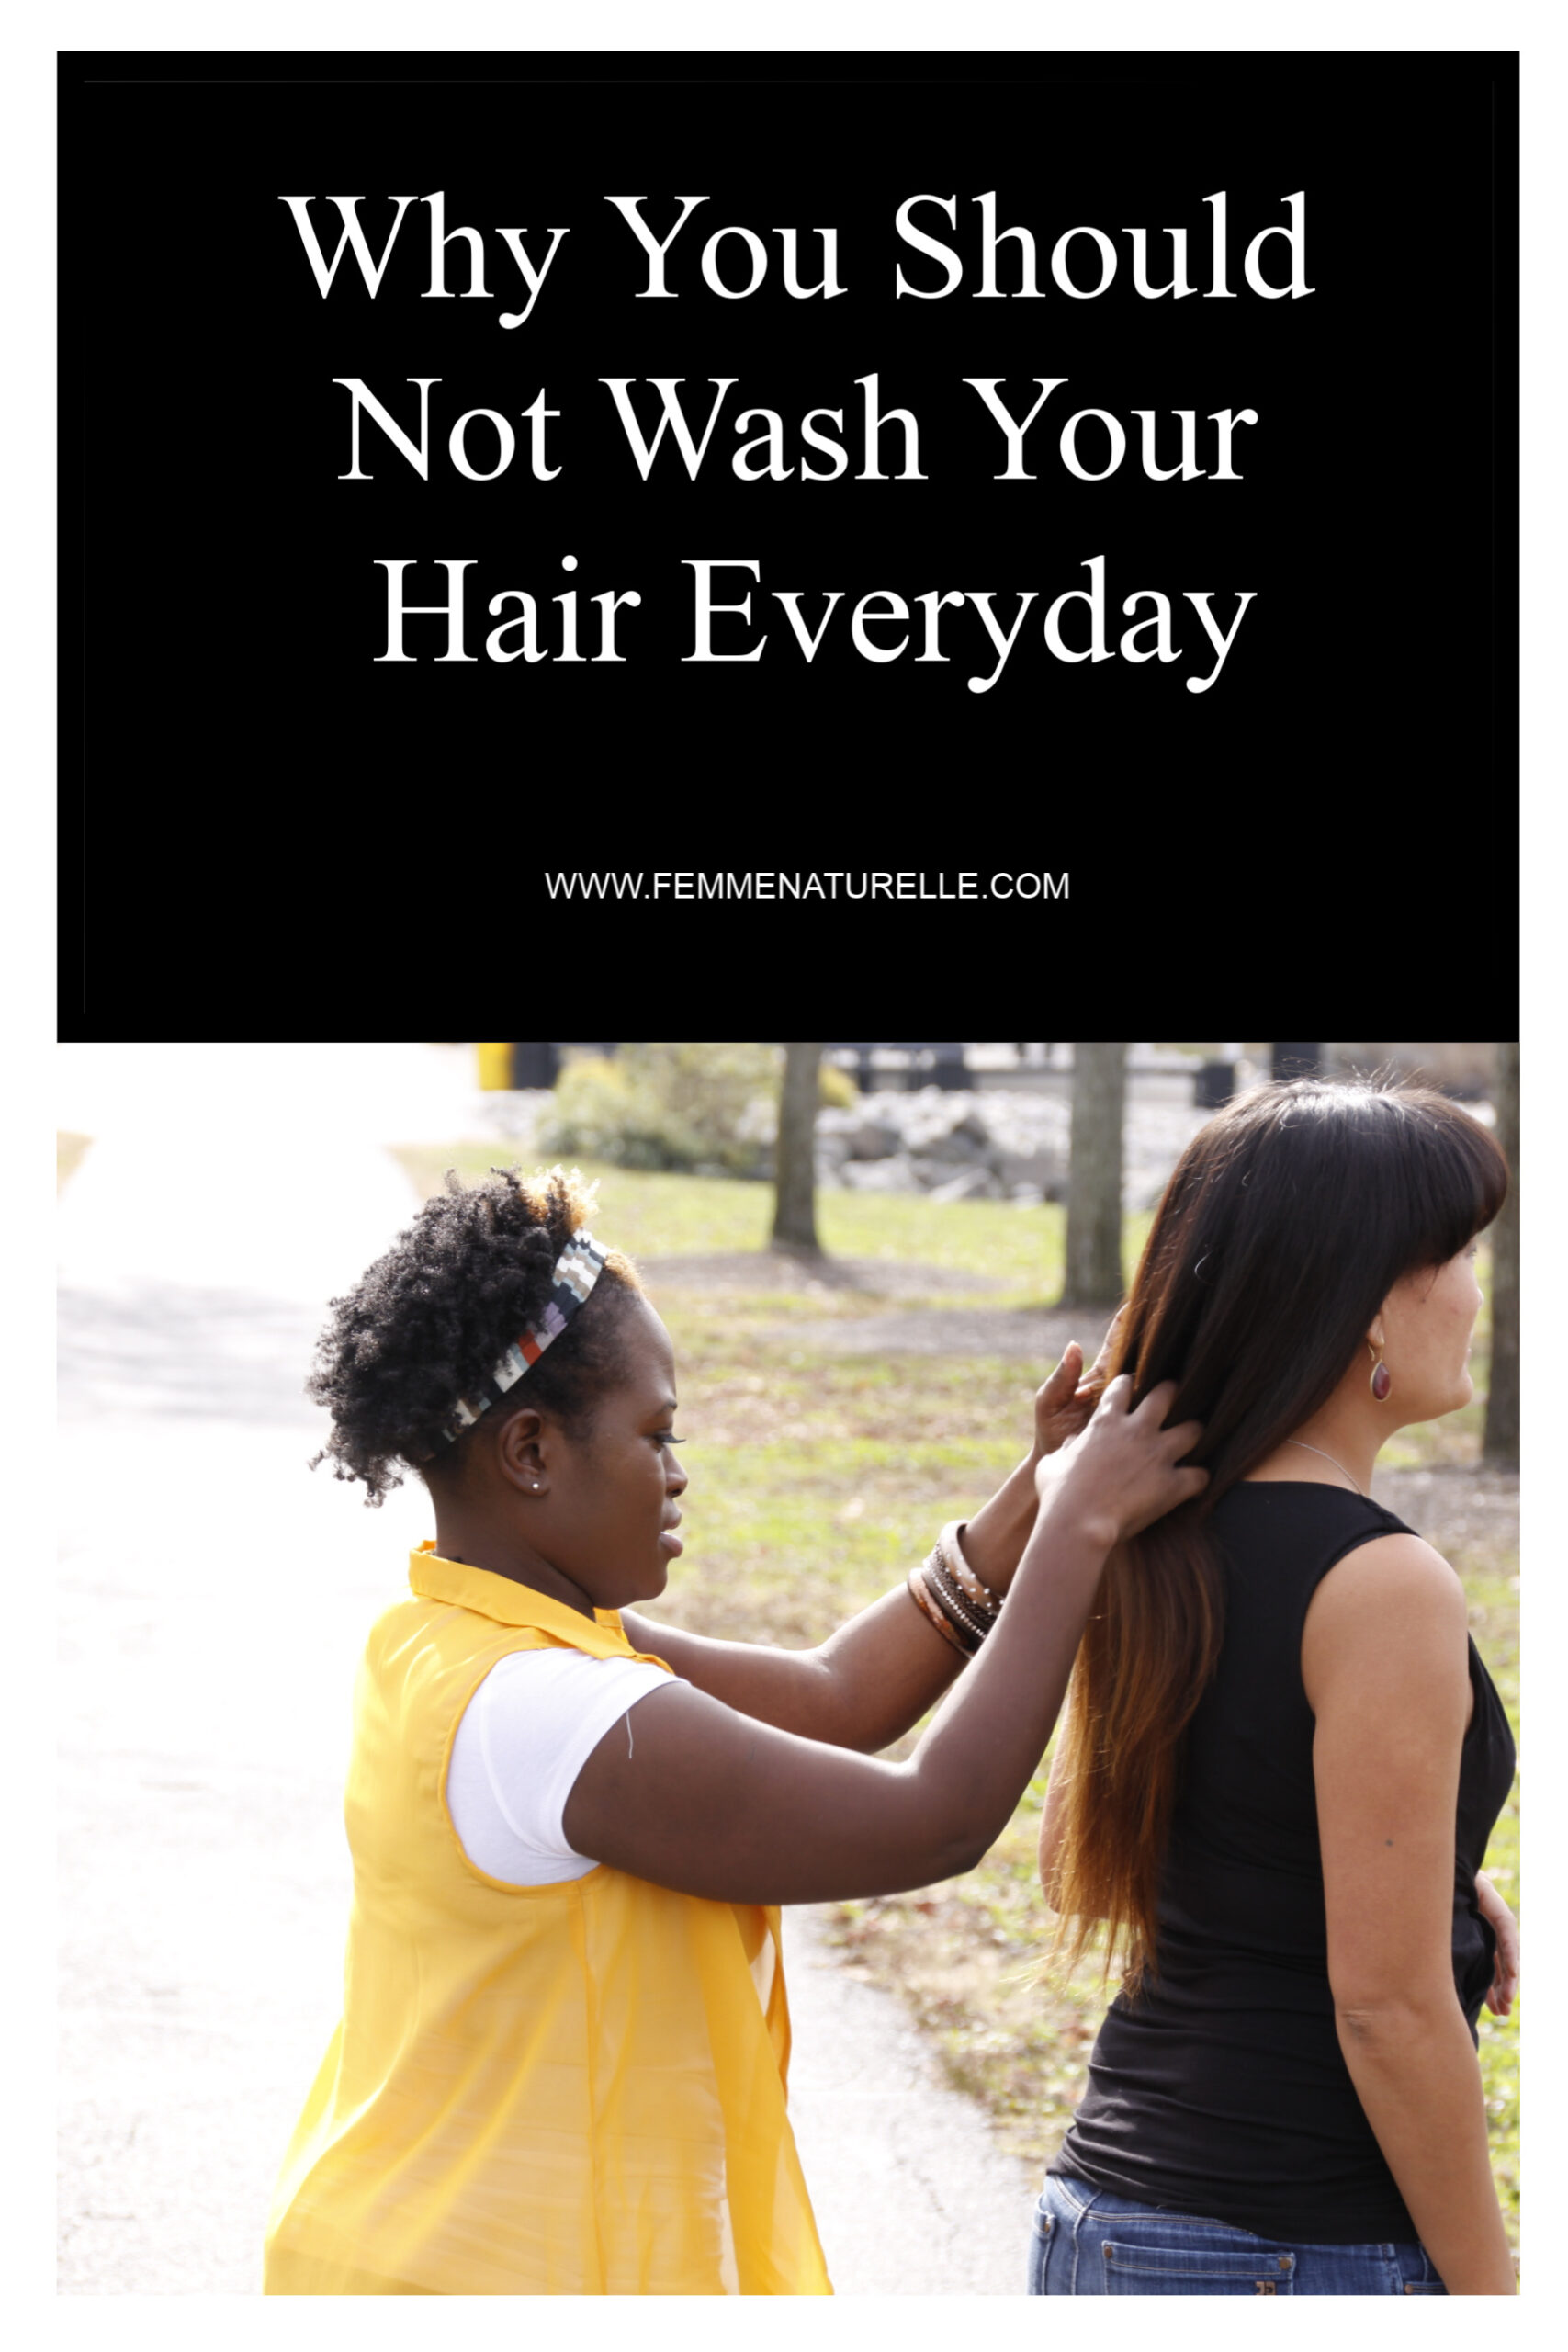 Why You Should Not Wash Your Hair Everyday